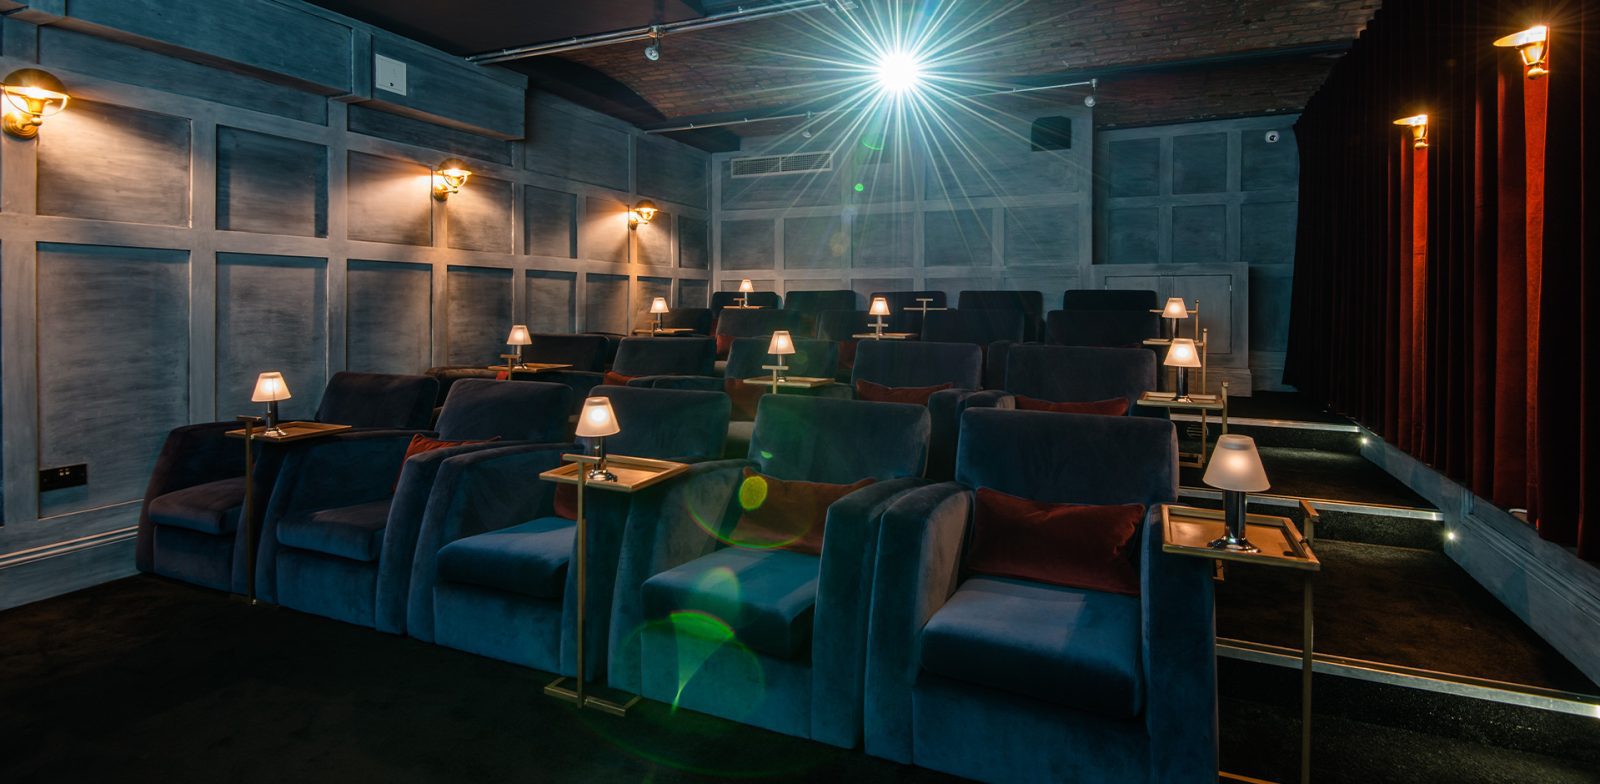 You can watch Disney classics with afternoon tea and cocktails at this little Manchester cinema, The Manc